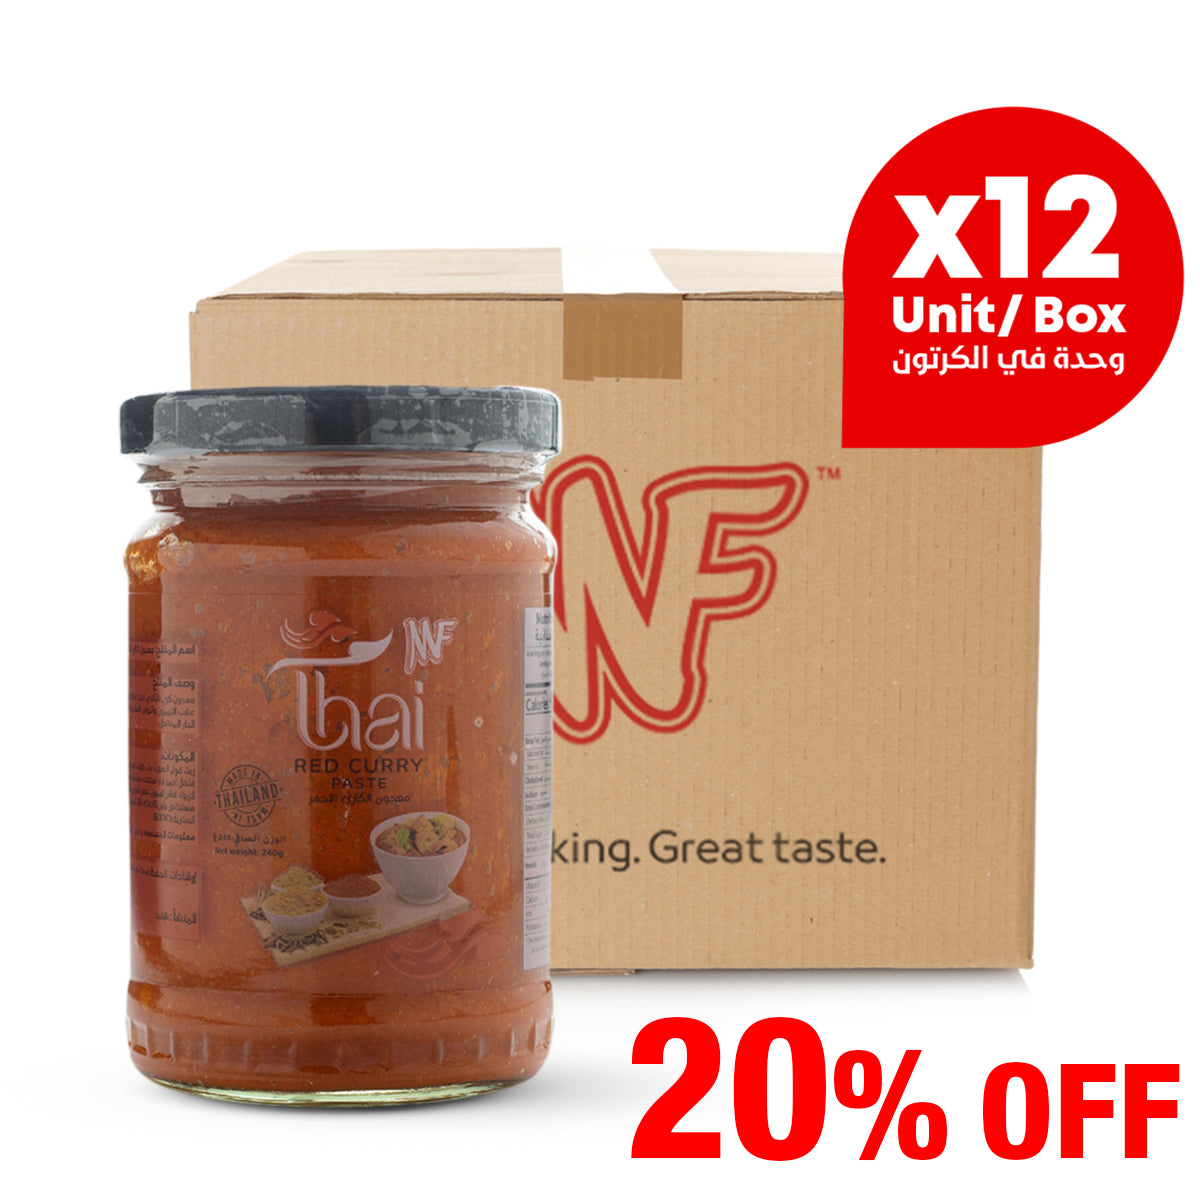 MF Thai Red Curry Paste 12x240g